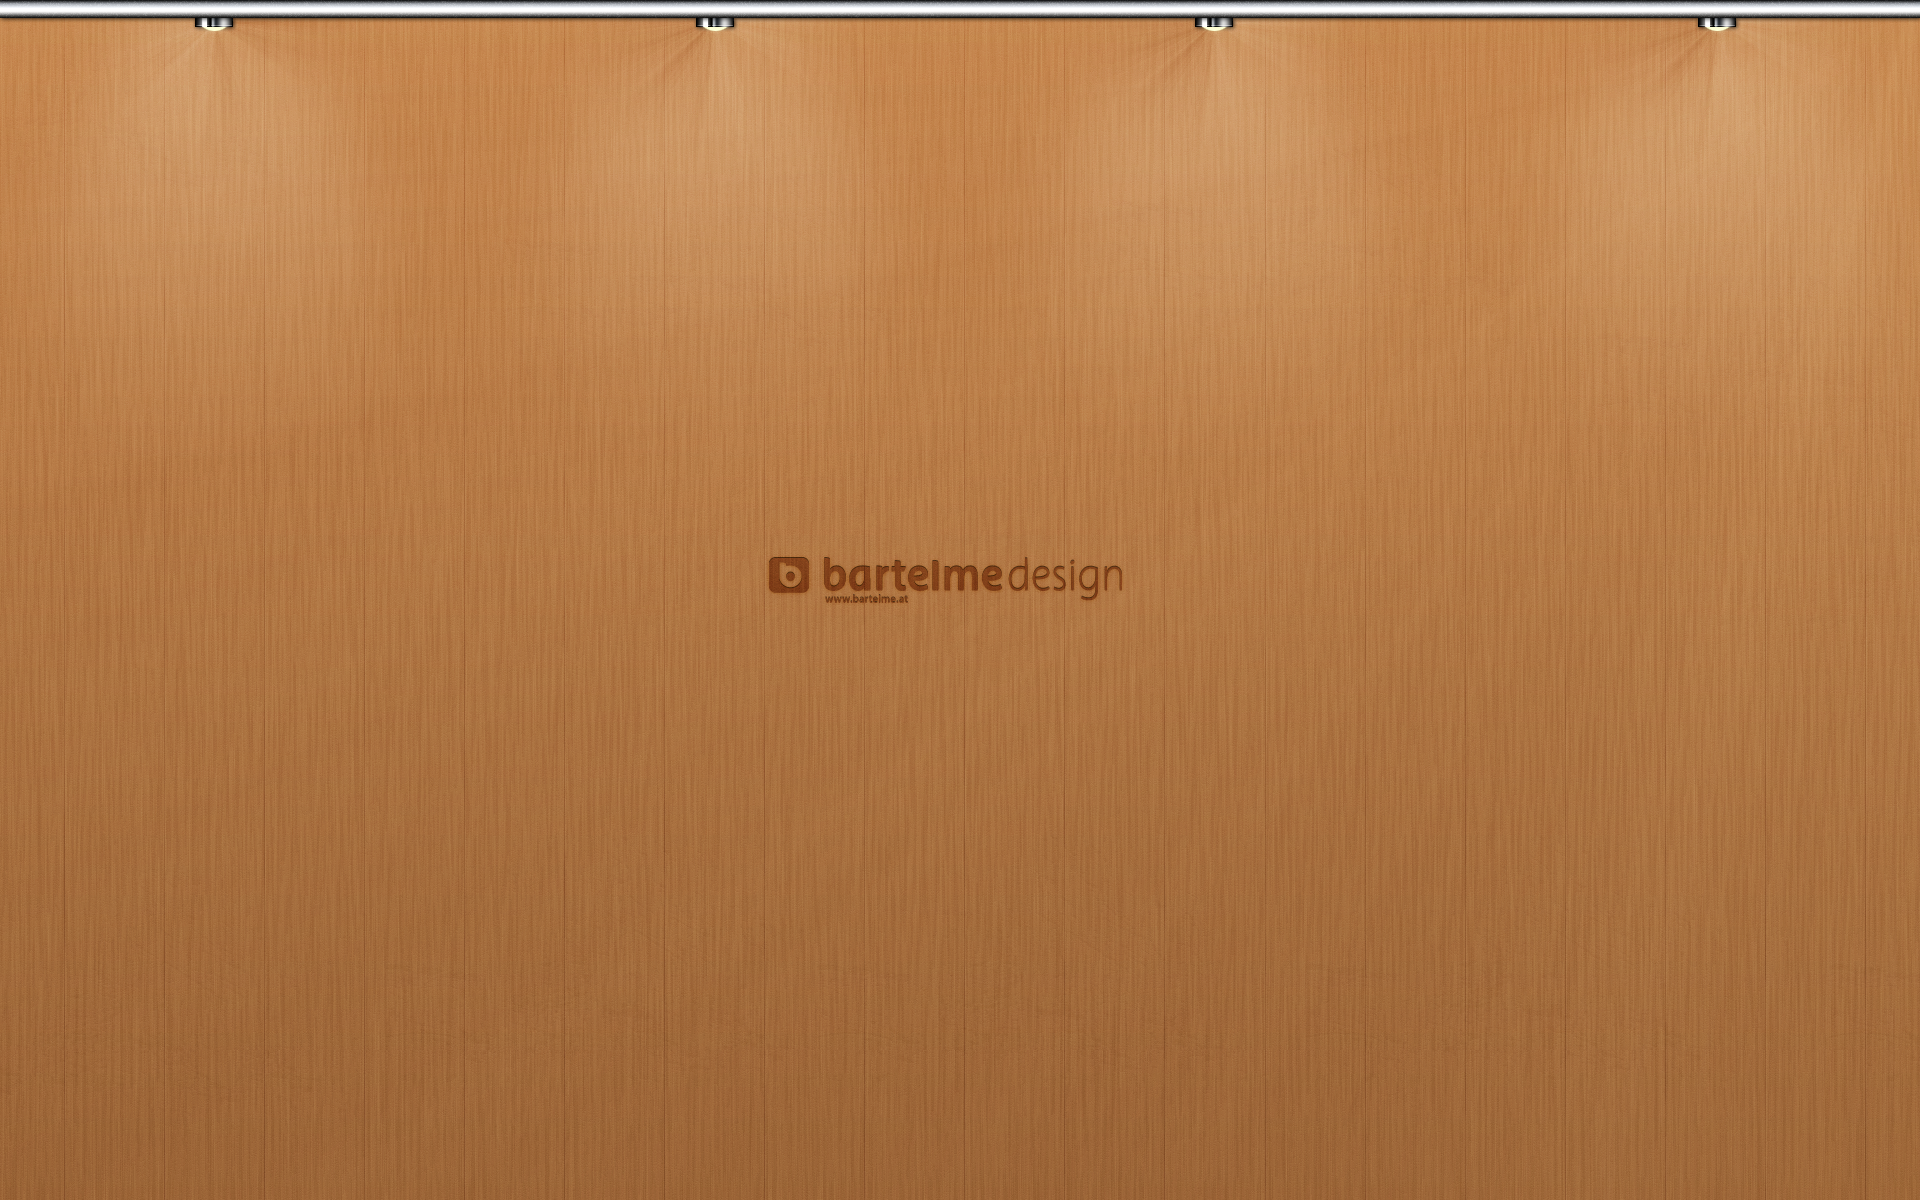 Bartelme Design Wallpaper You May It Right Here Enjoy